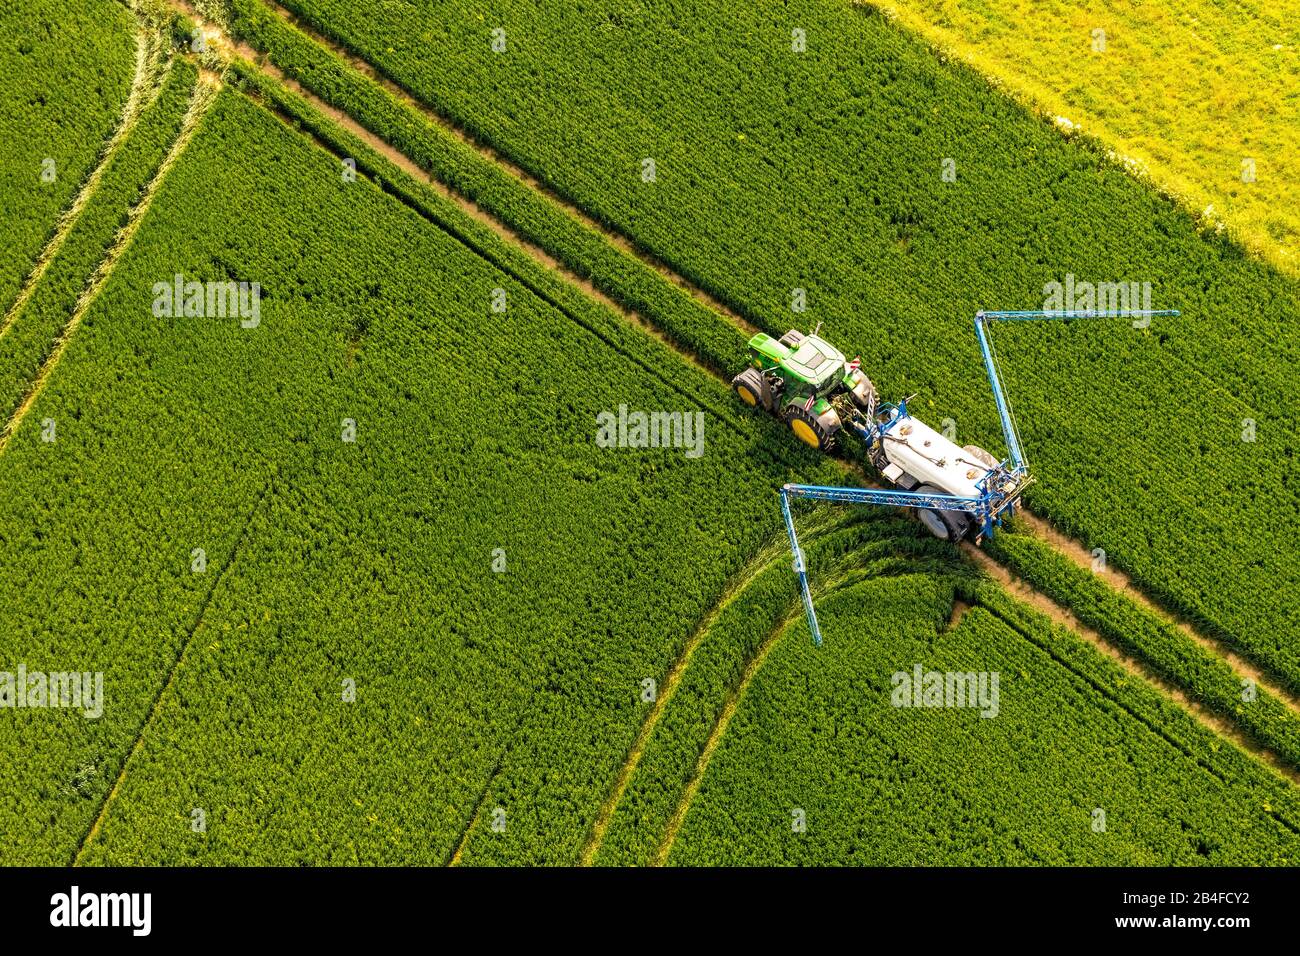 Aerial view of a tractor spraying insecticides on a field at Westönner Bundesstrasse, Mawicker Bundesstrasse and Autobahn A44 with fields and meadows in Werl in Soester Börde in North Rhine-Westphalia in Germany, Werl, Soester Börde, North Rhine-Westphalia, Germany Höhberg, fields, environmental protection, insecticide, spraying fields, furrows, cornfield, green tractor Stock Photo